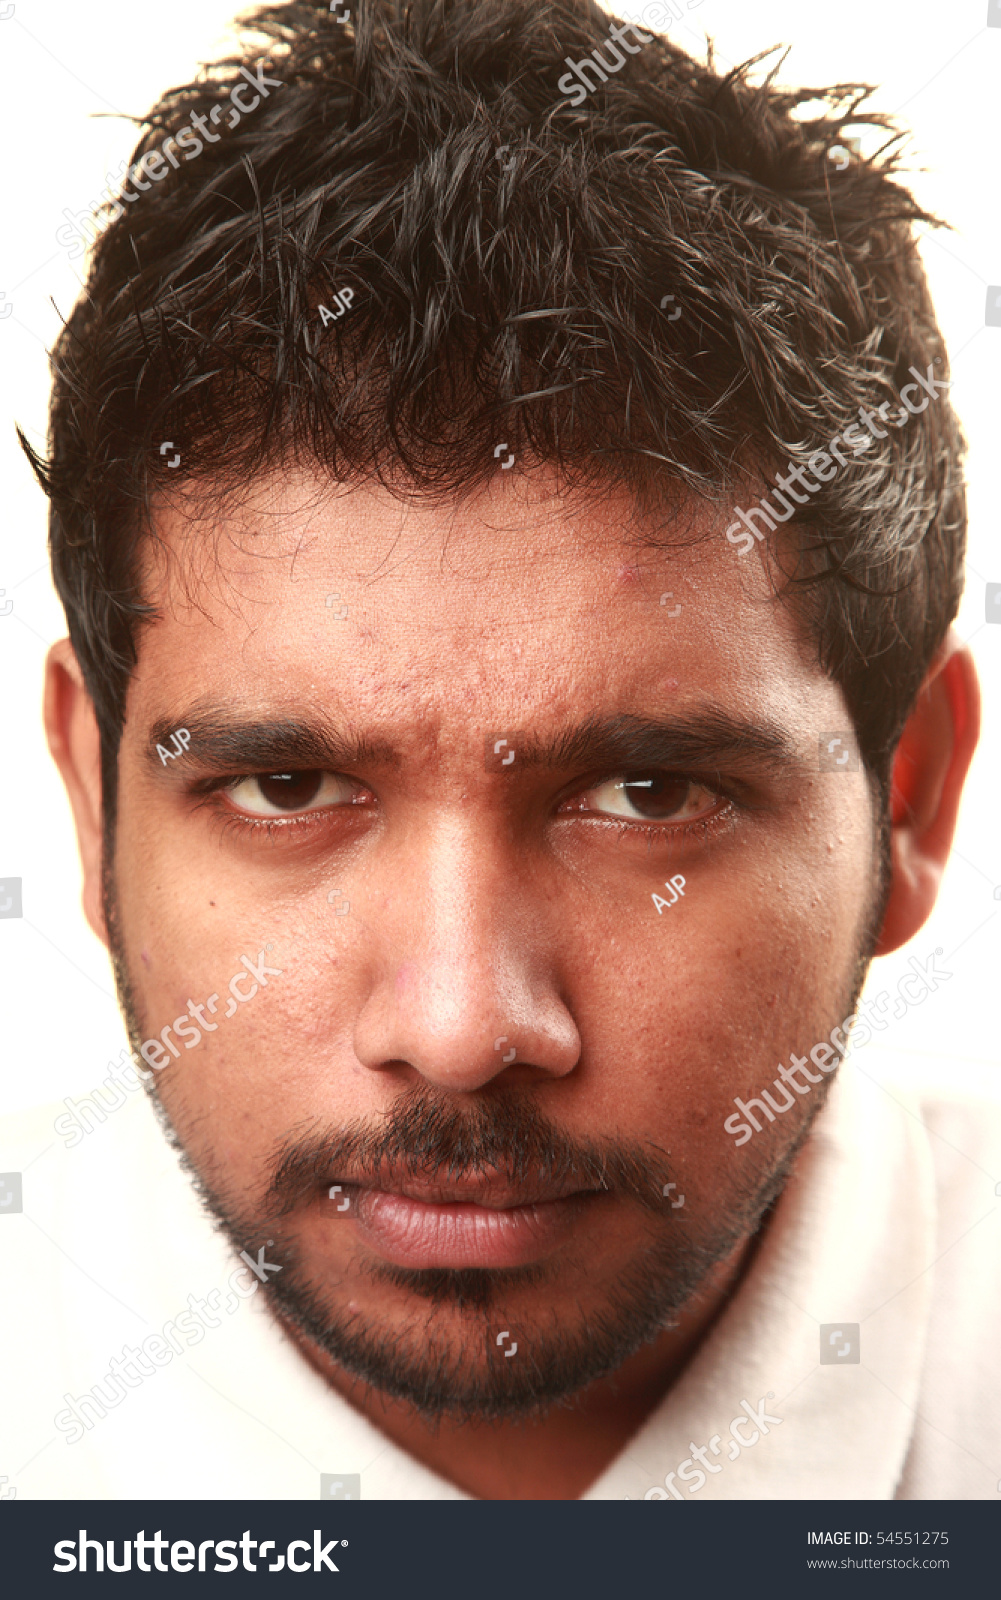 An Indian Young Man Giving A Sharp Look Stock Photo 54551275 : Shutterstock